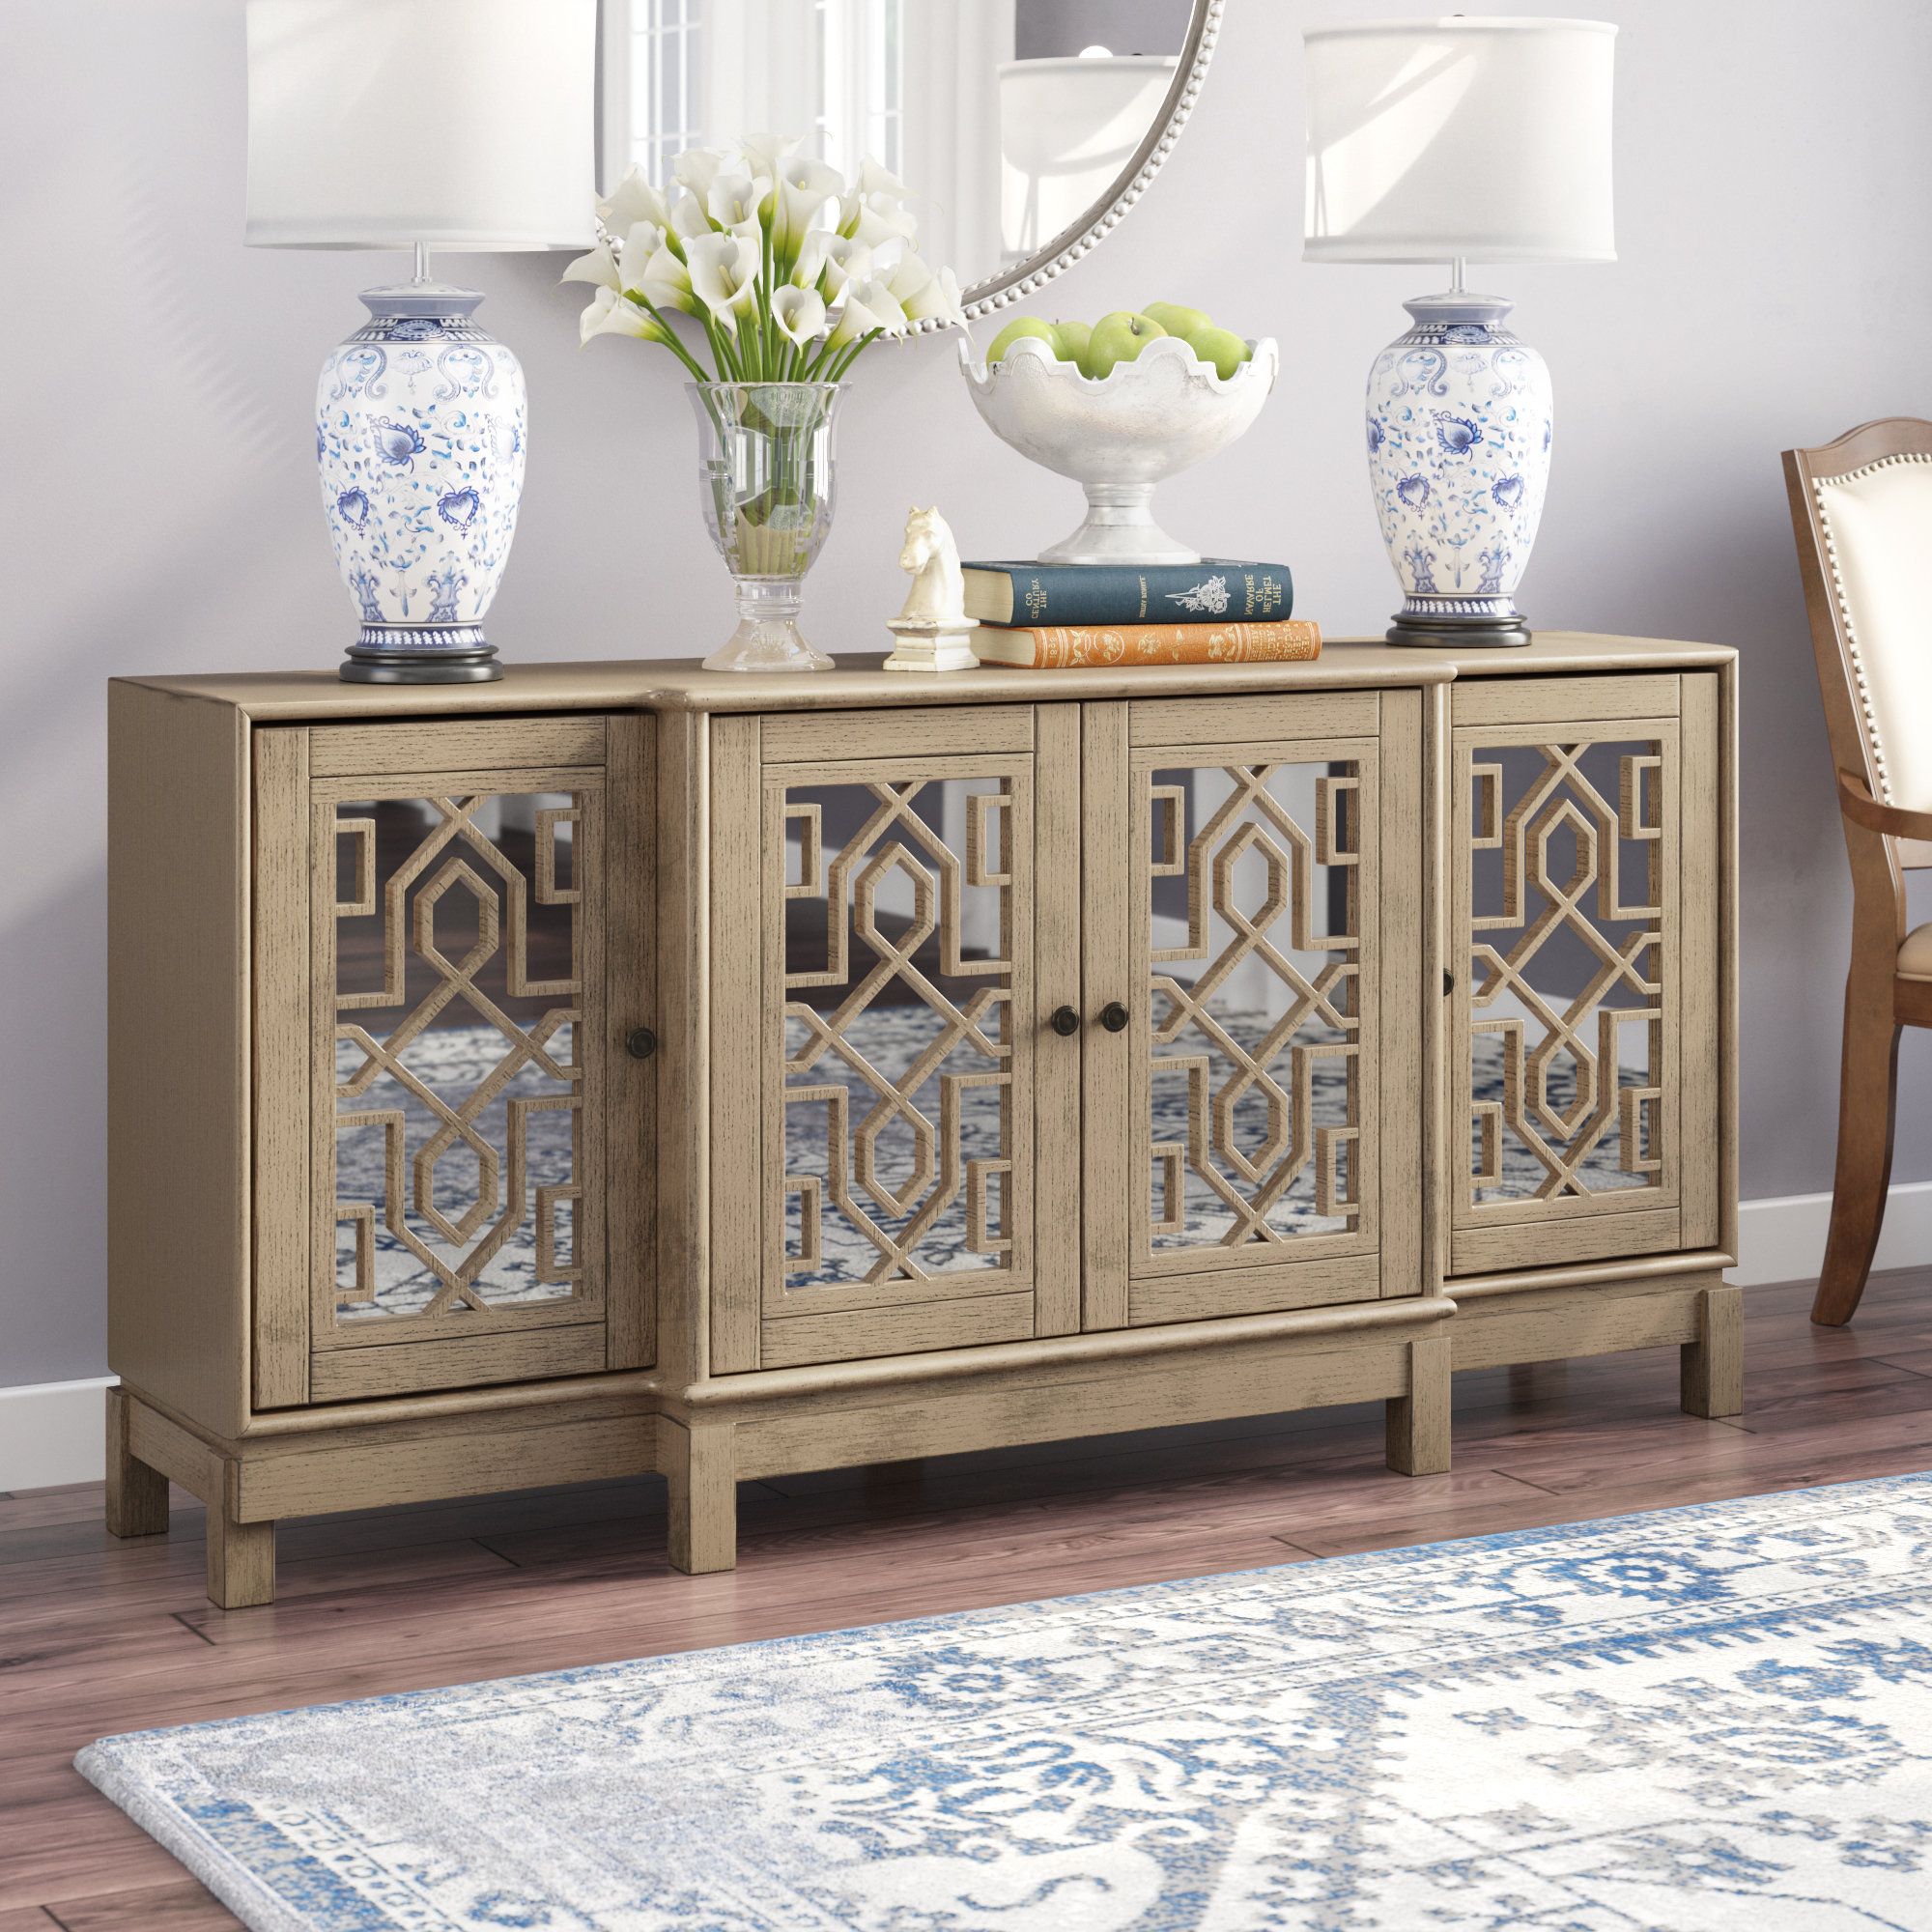 Gold & Silver Sideboards & Buffets You'll Love In 2019 | Wayfair Pertaining To Armelle Sideboards (View 6 of 20)